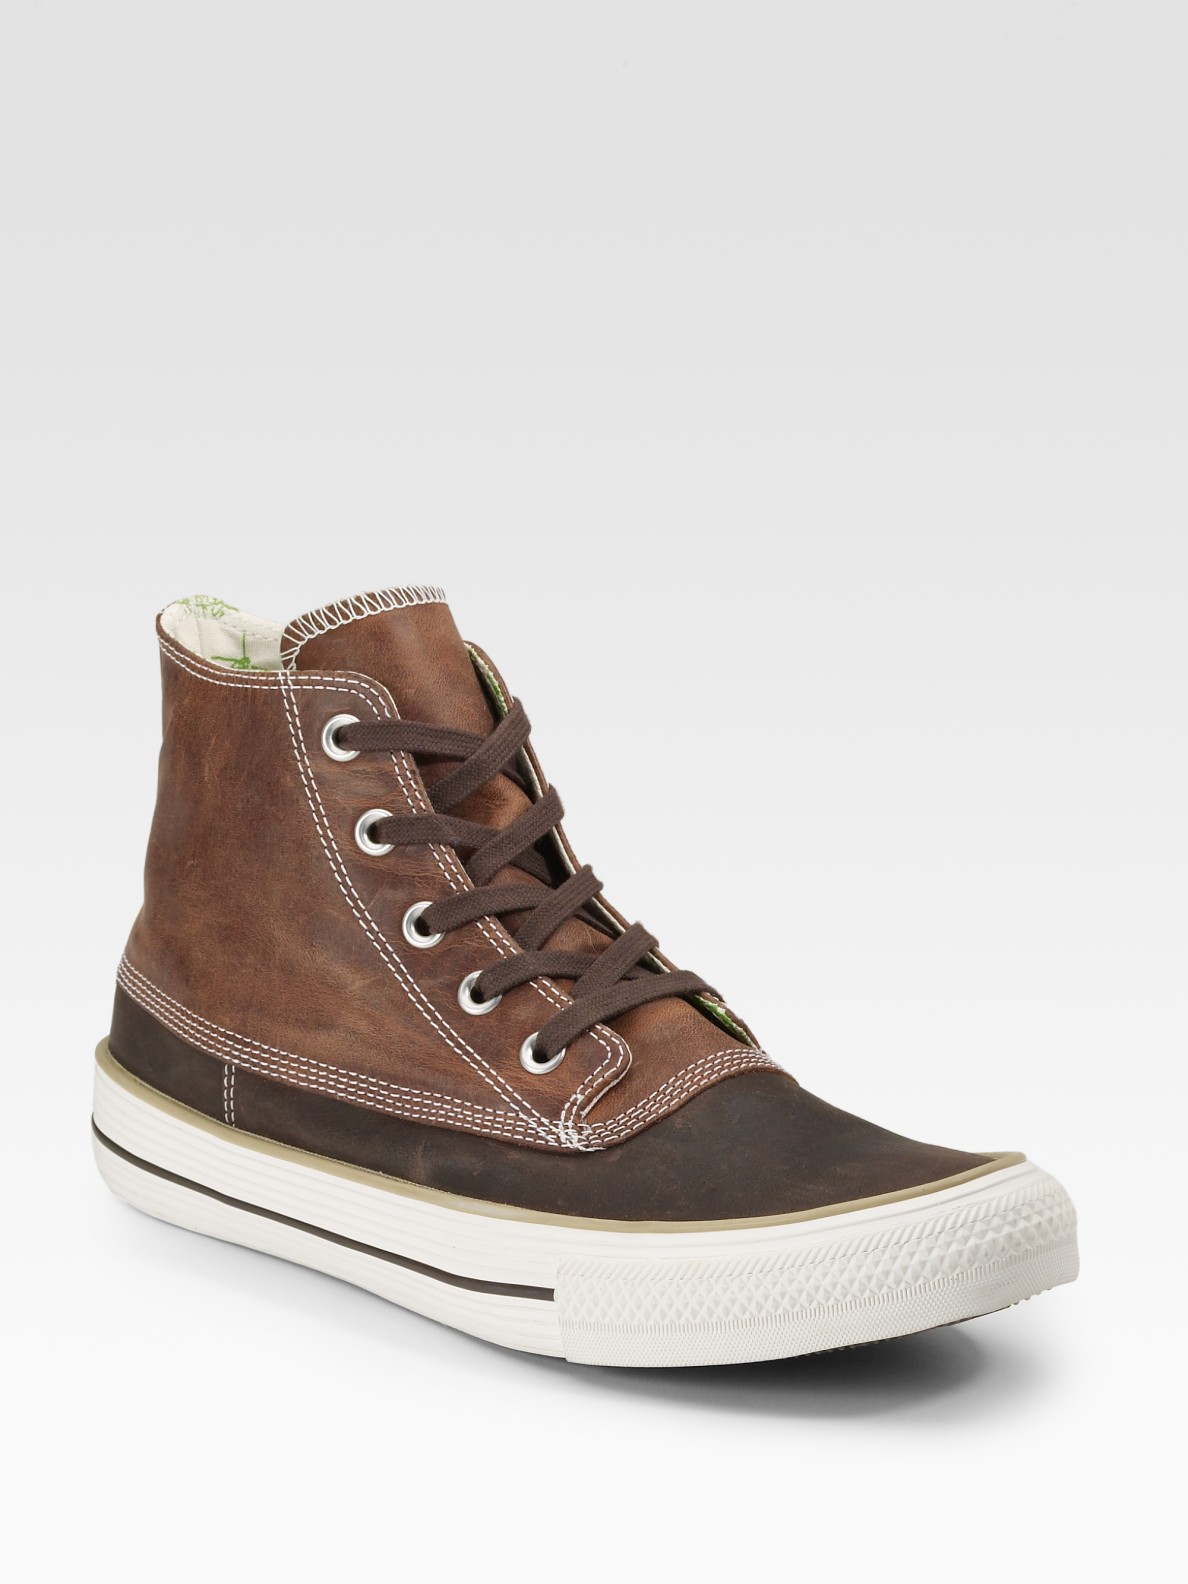 Converse Chuck Taylor Leather Duck 